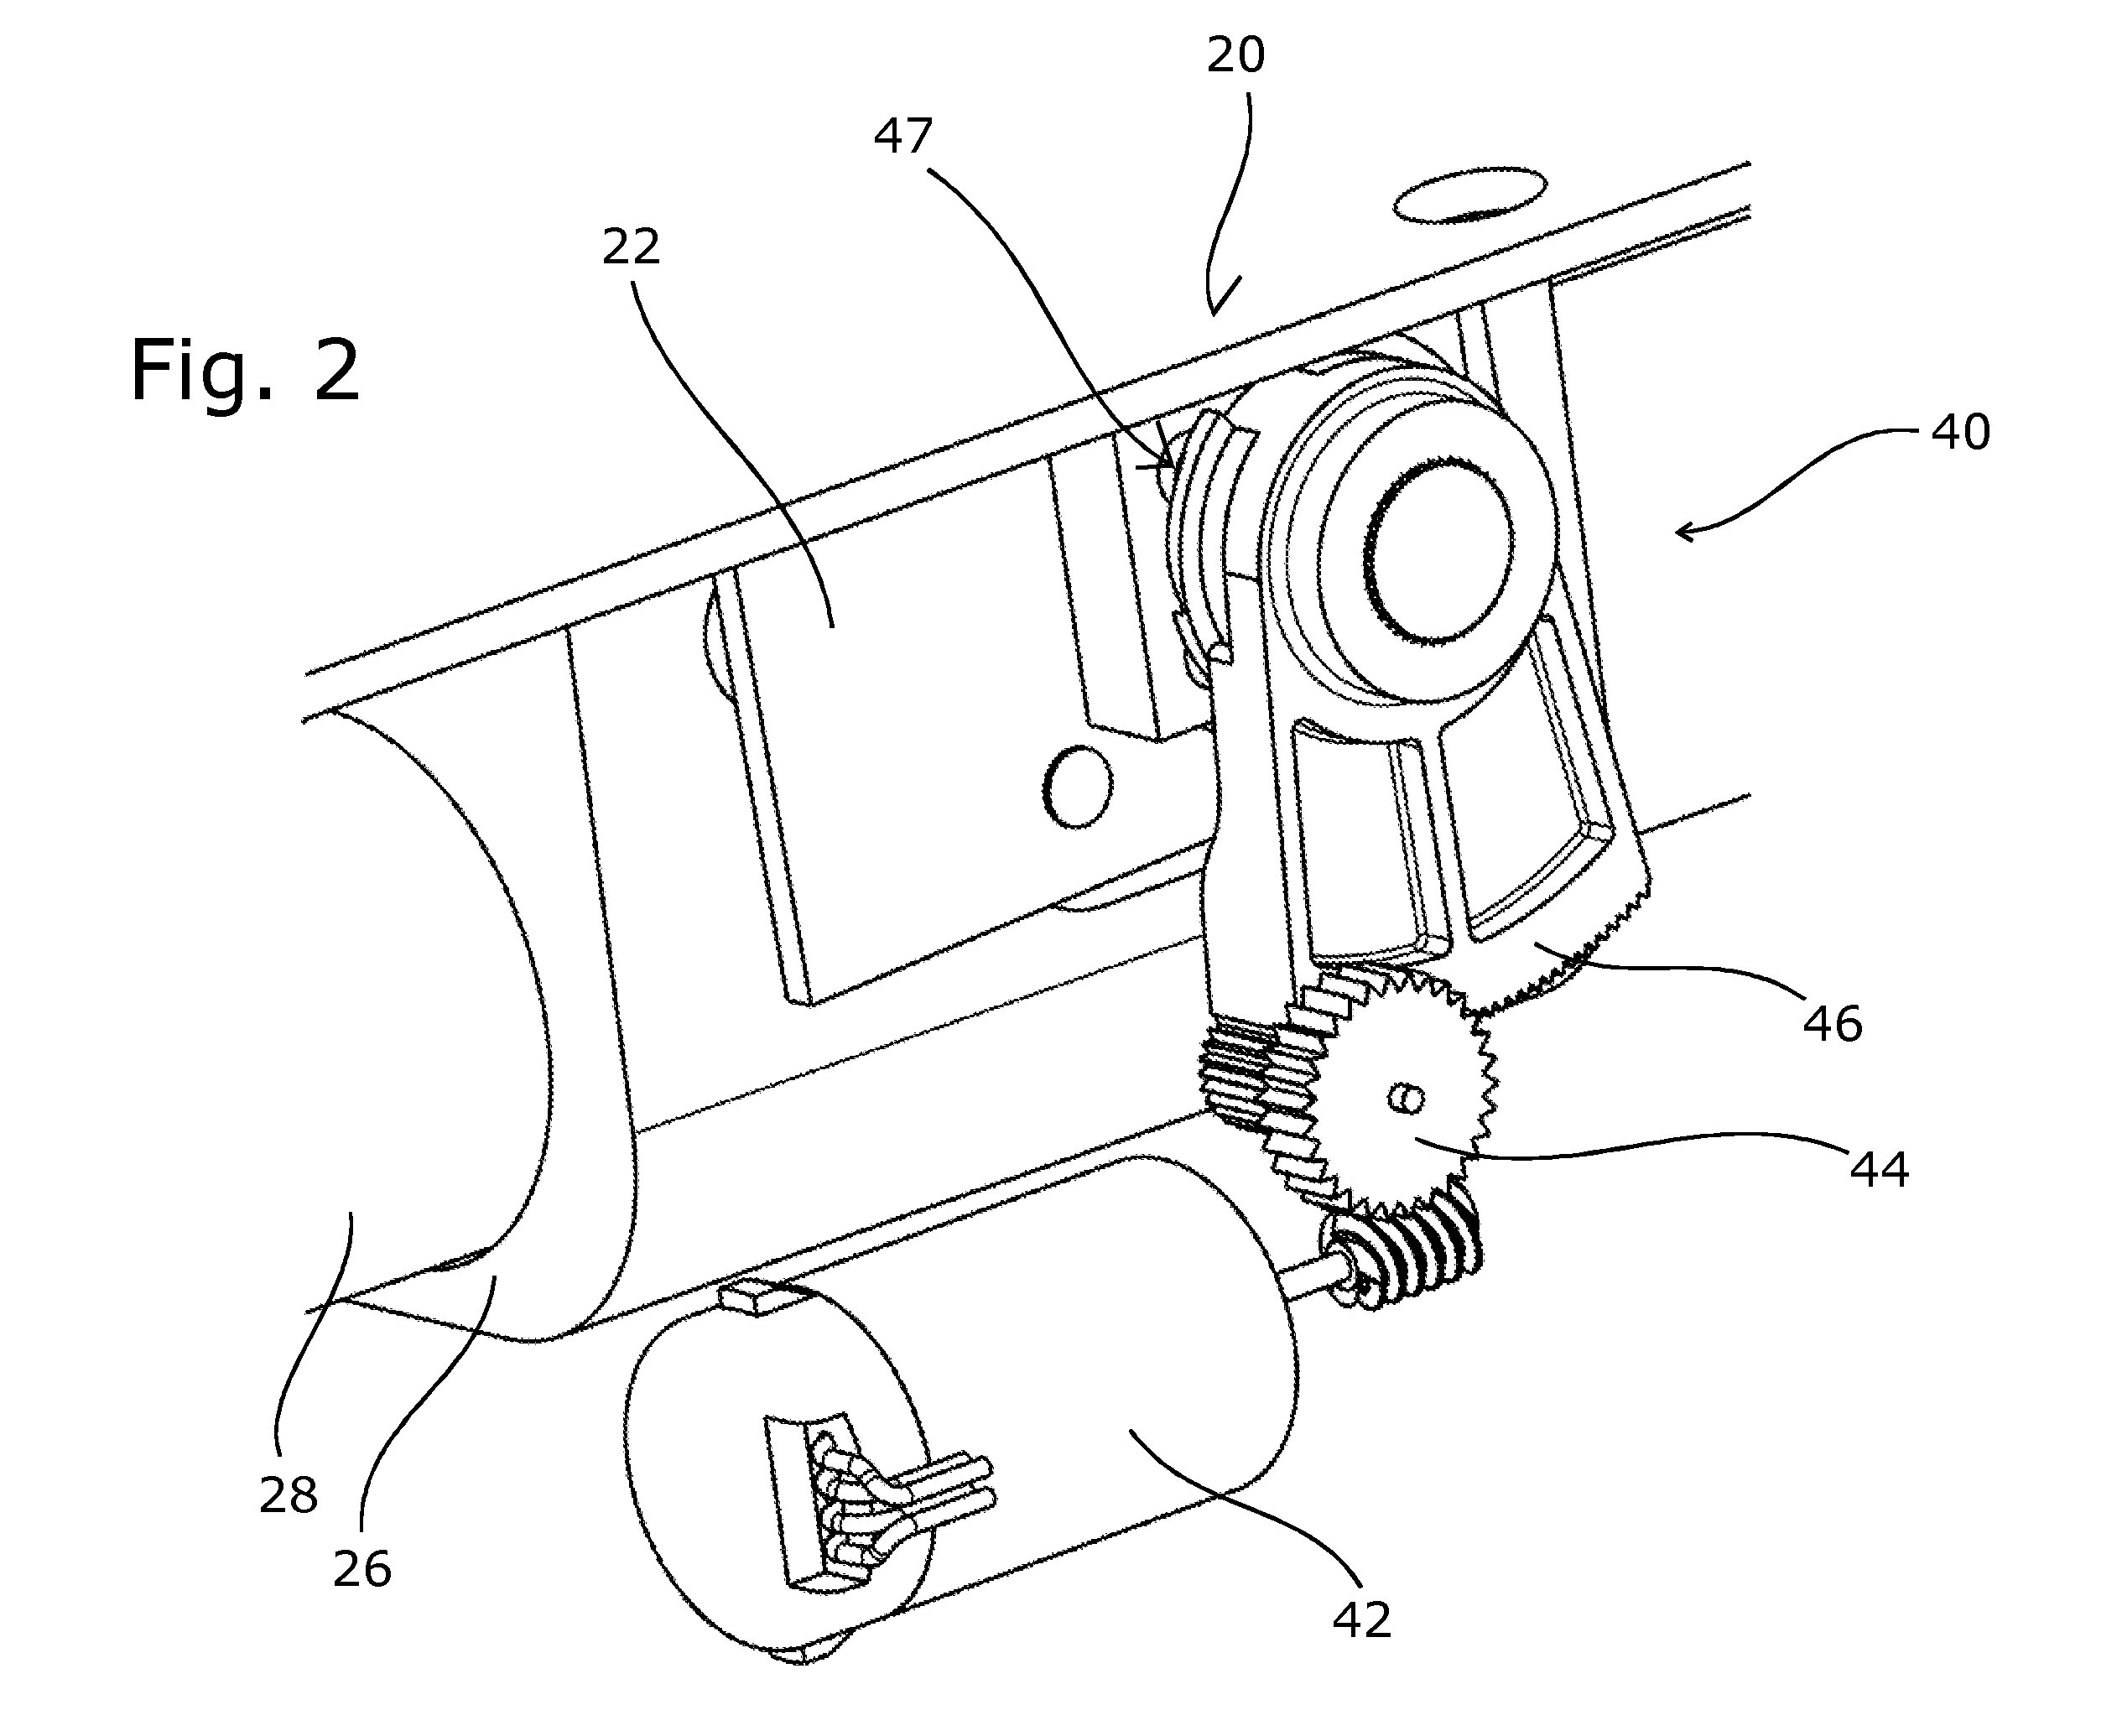 Steering column module including a steering column with a longitudinal and/or inclination adjustment